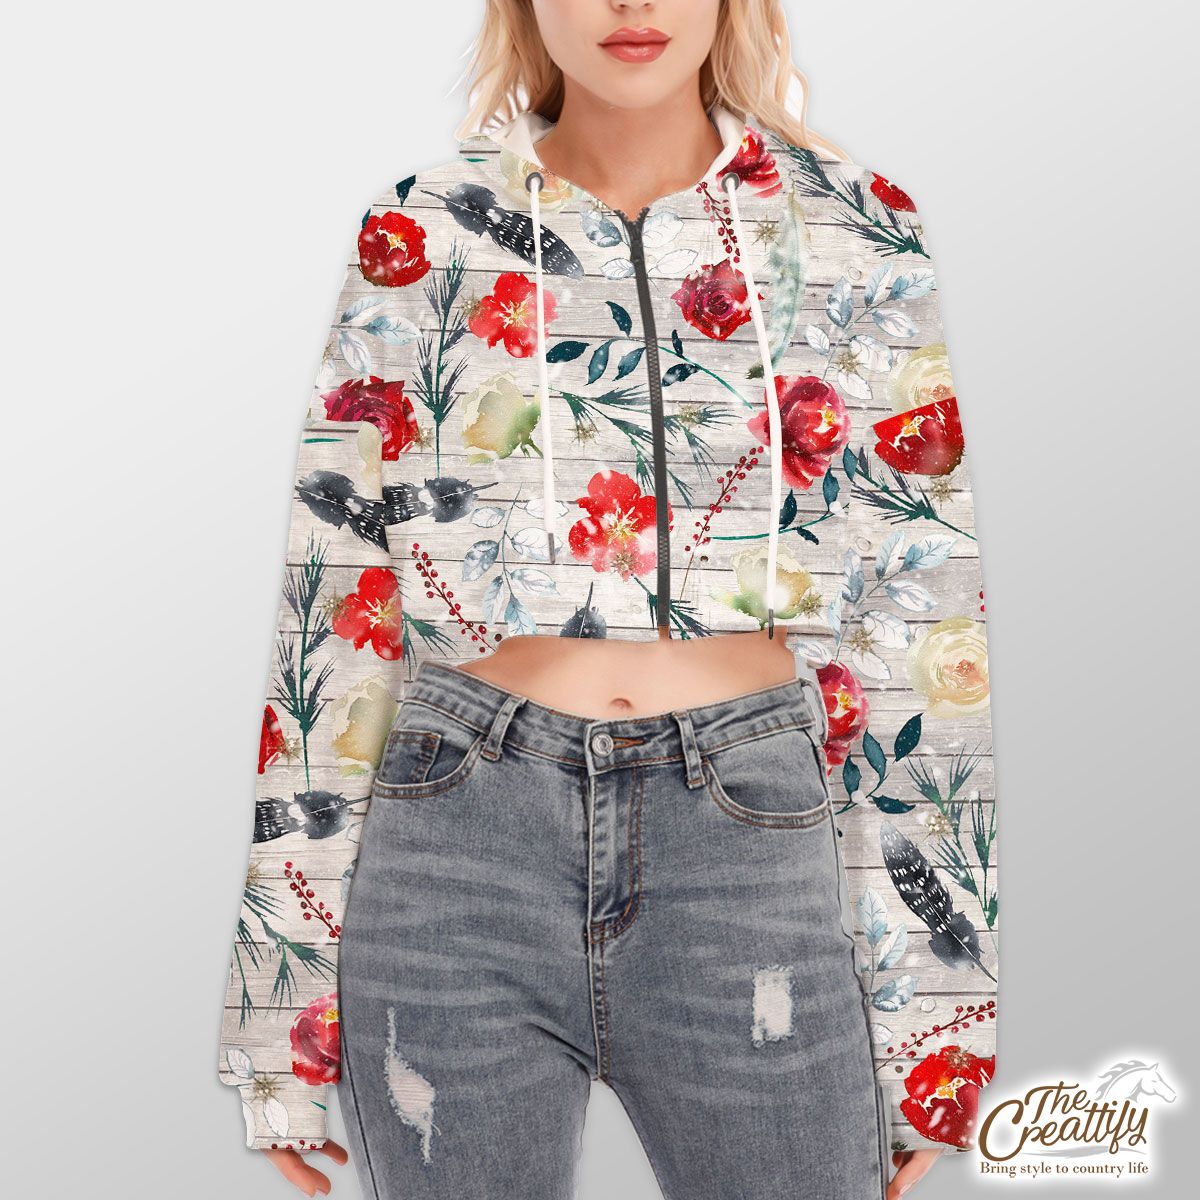 Florals With Red Berries Pattern Hoodie With Zipper Closure